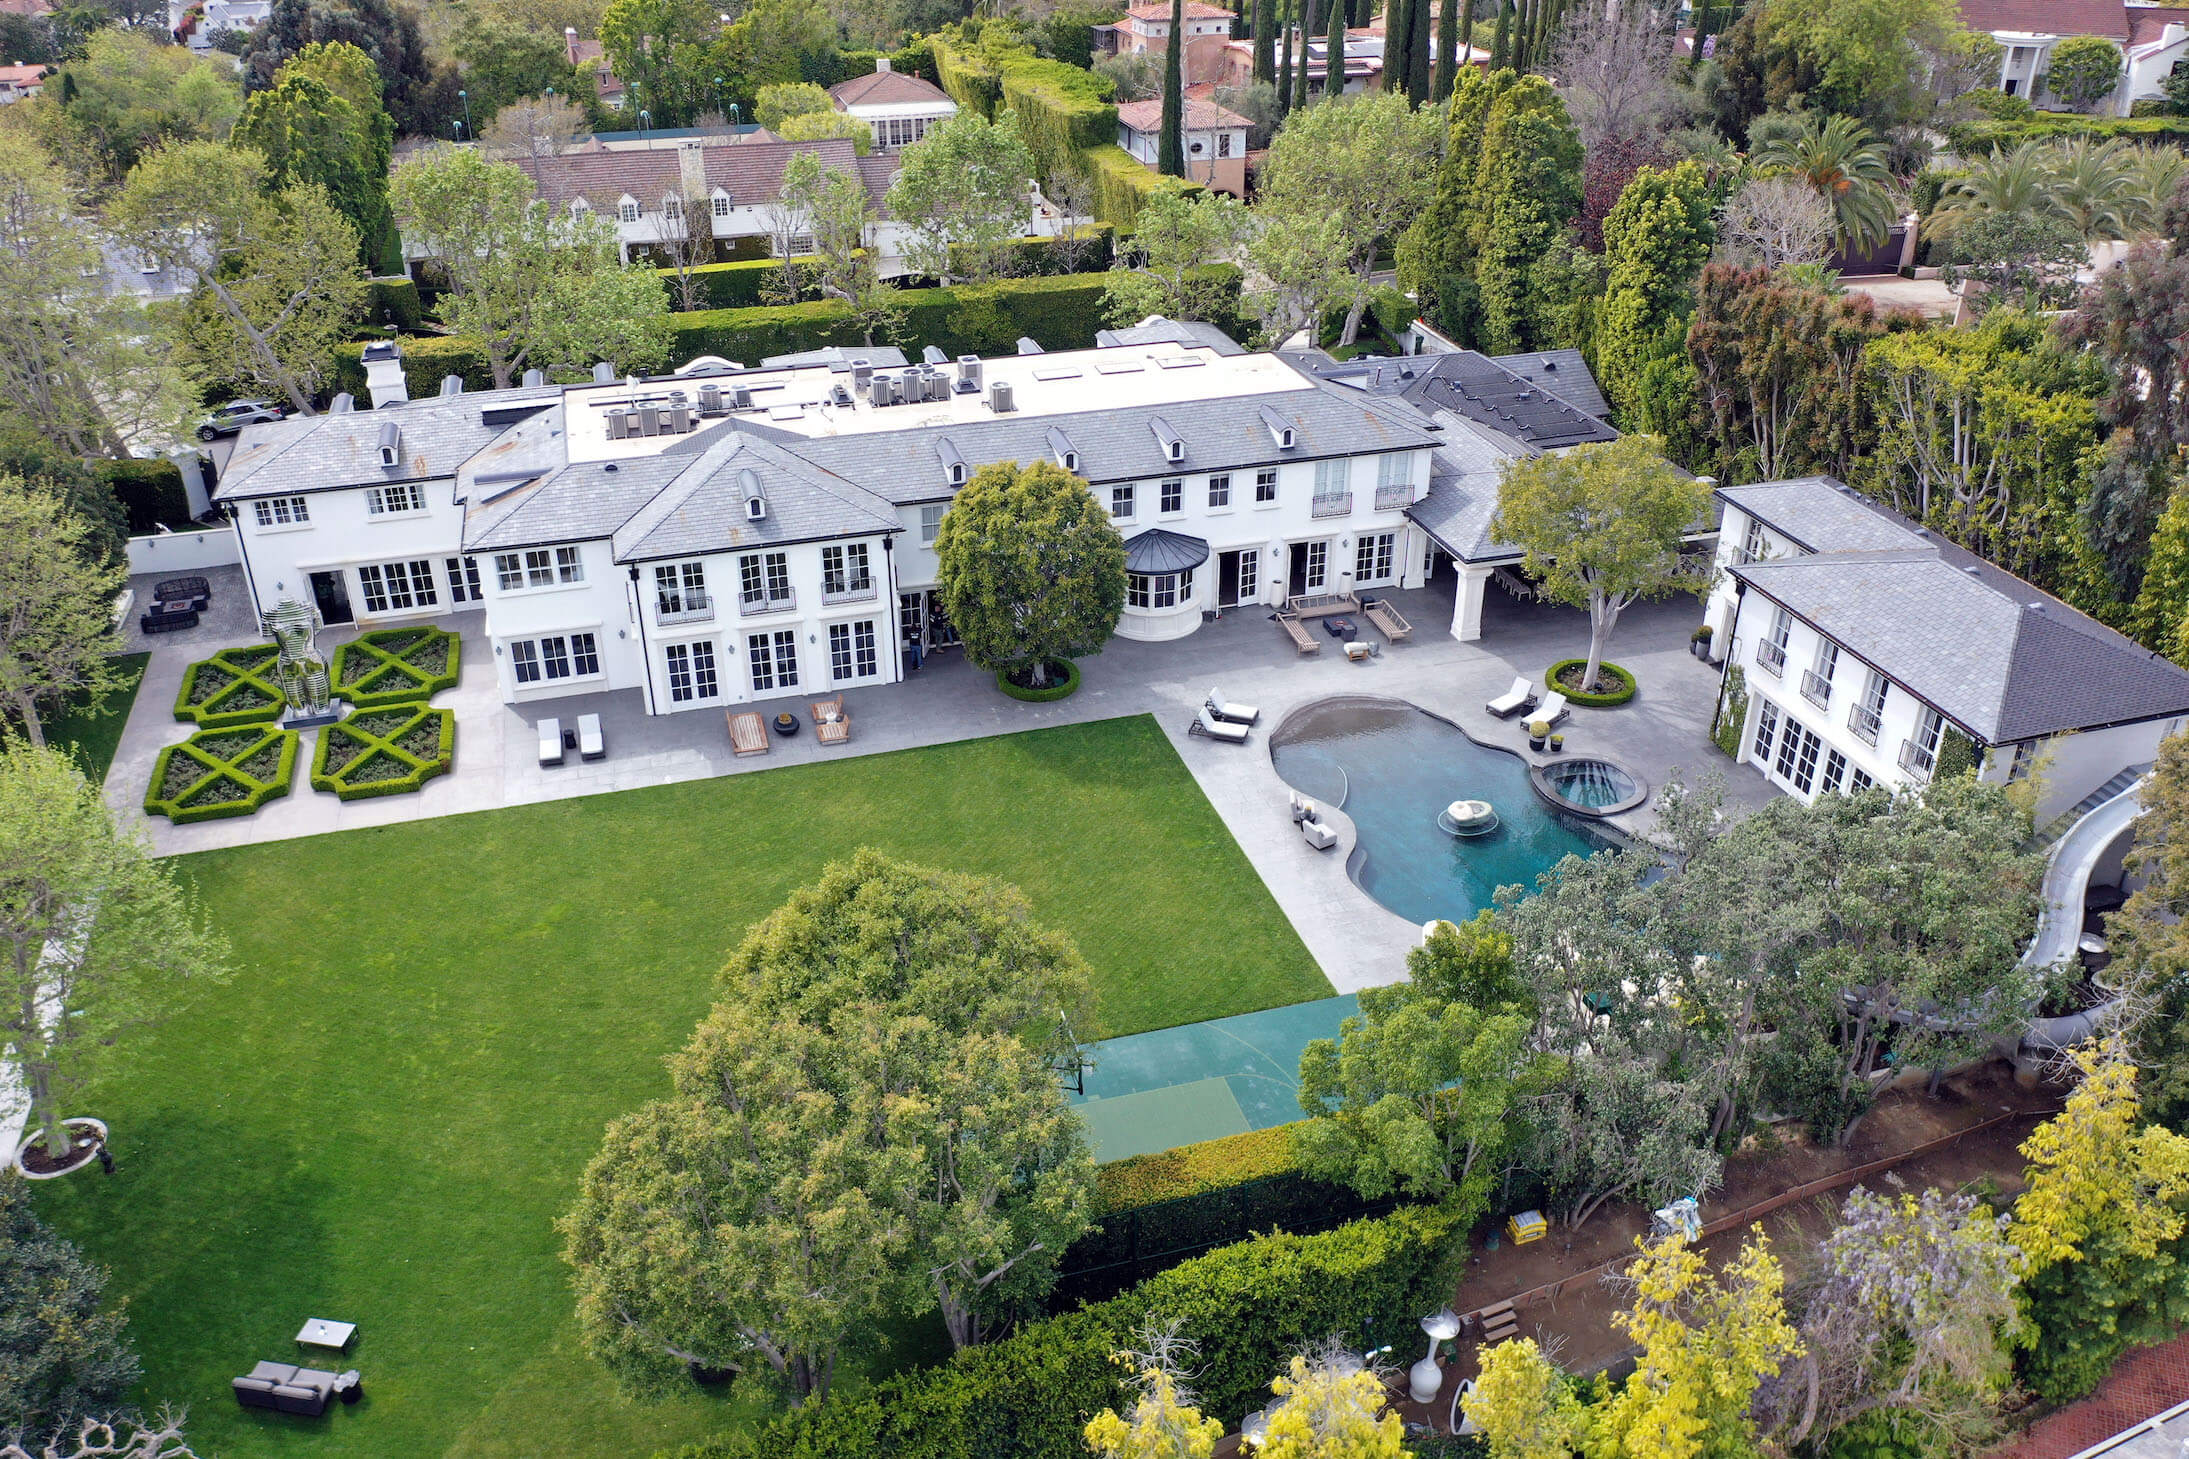 Inside P. Diddy's $40 Million Los Angeles Home Raided by Homeland Security